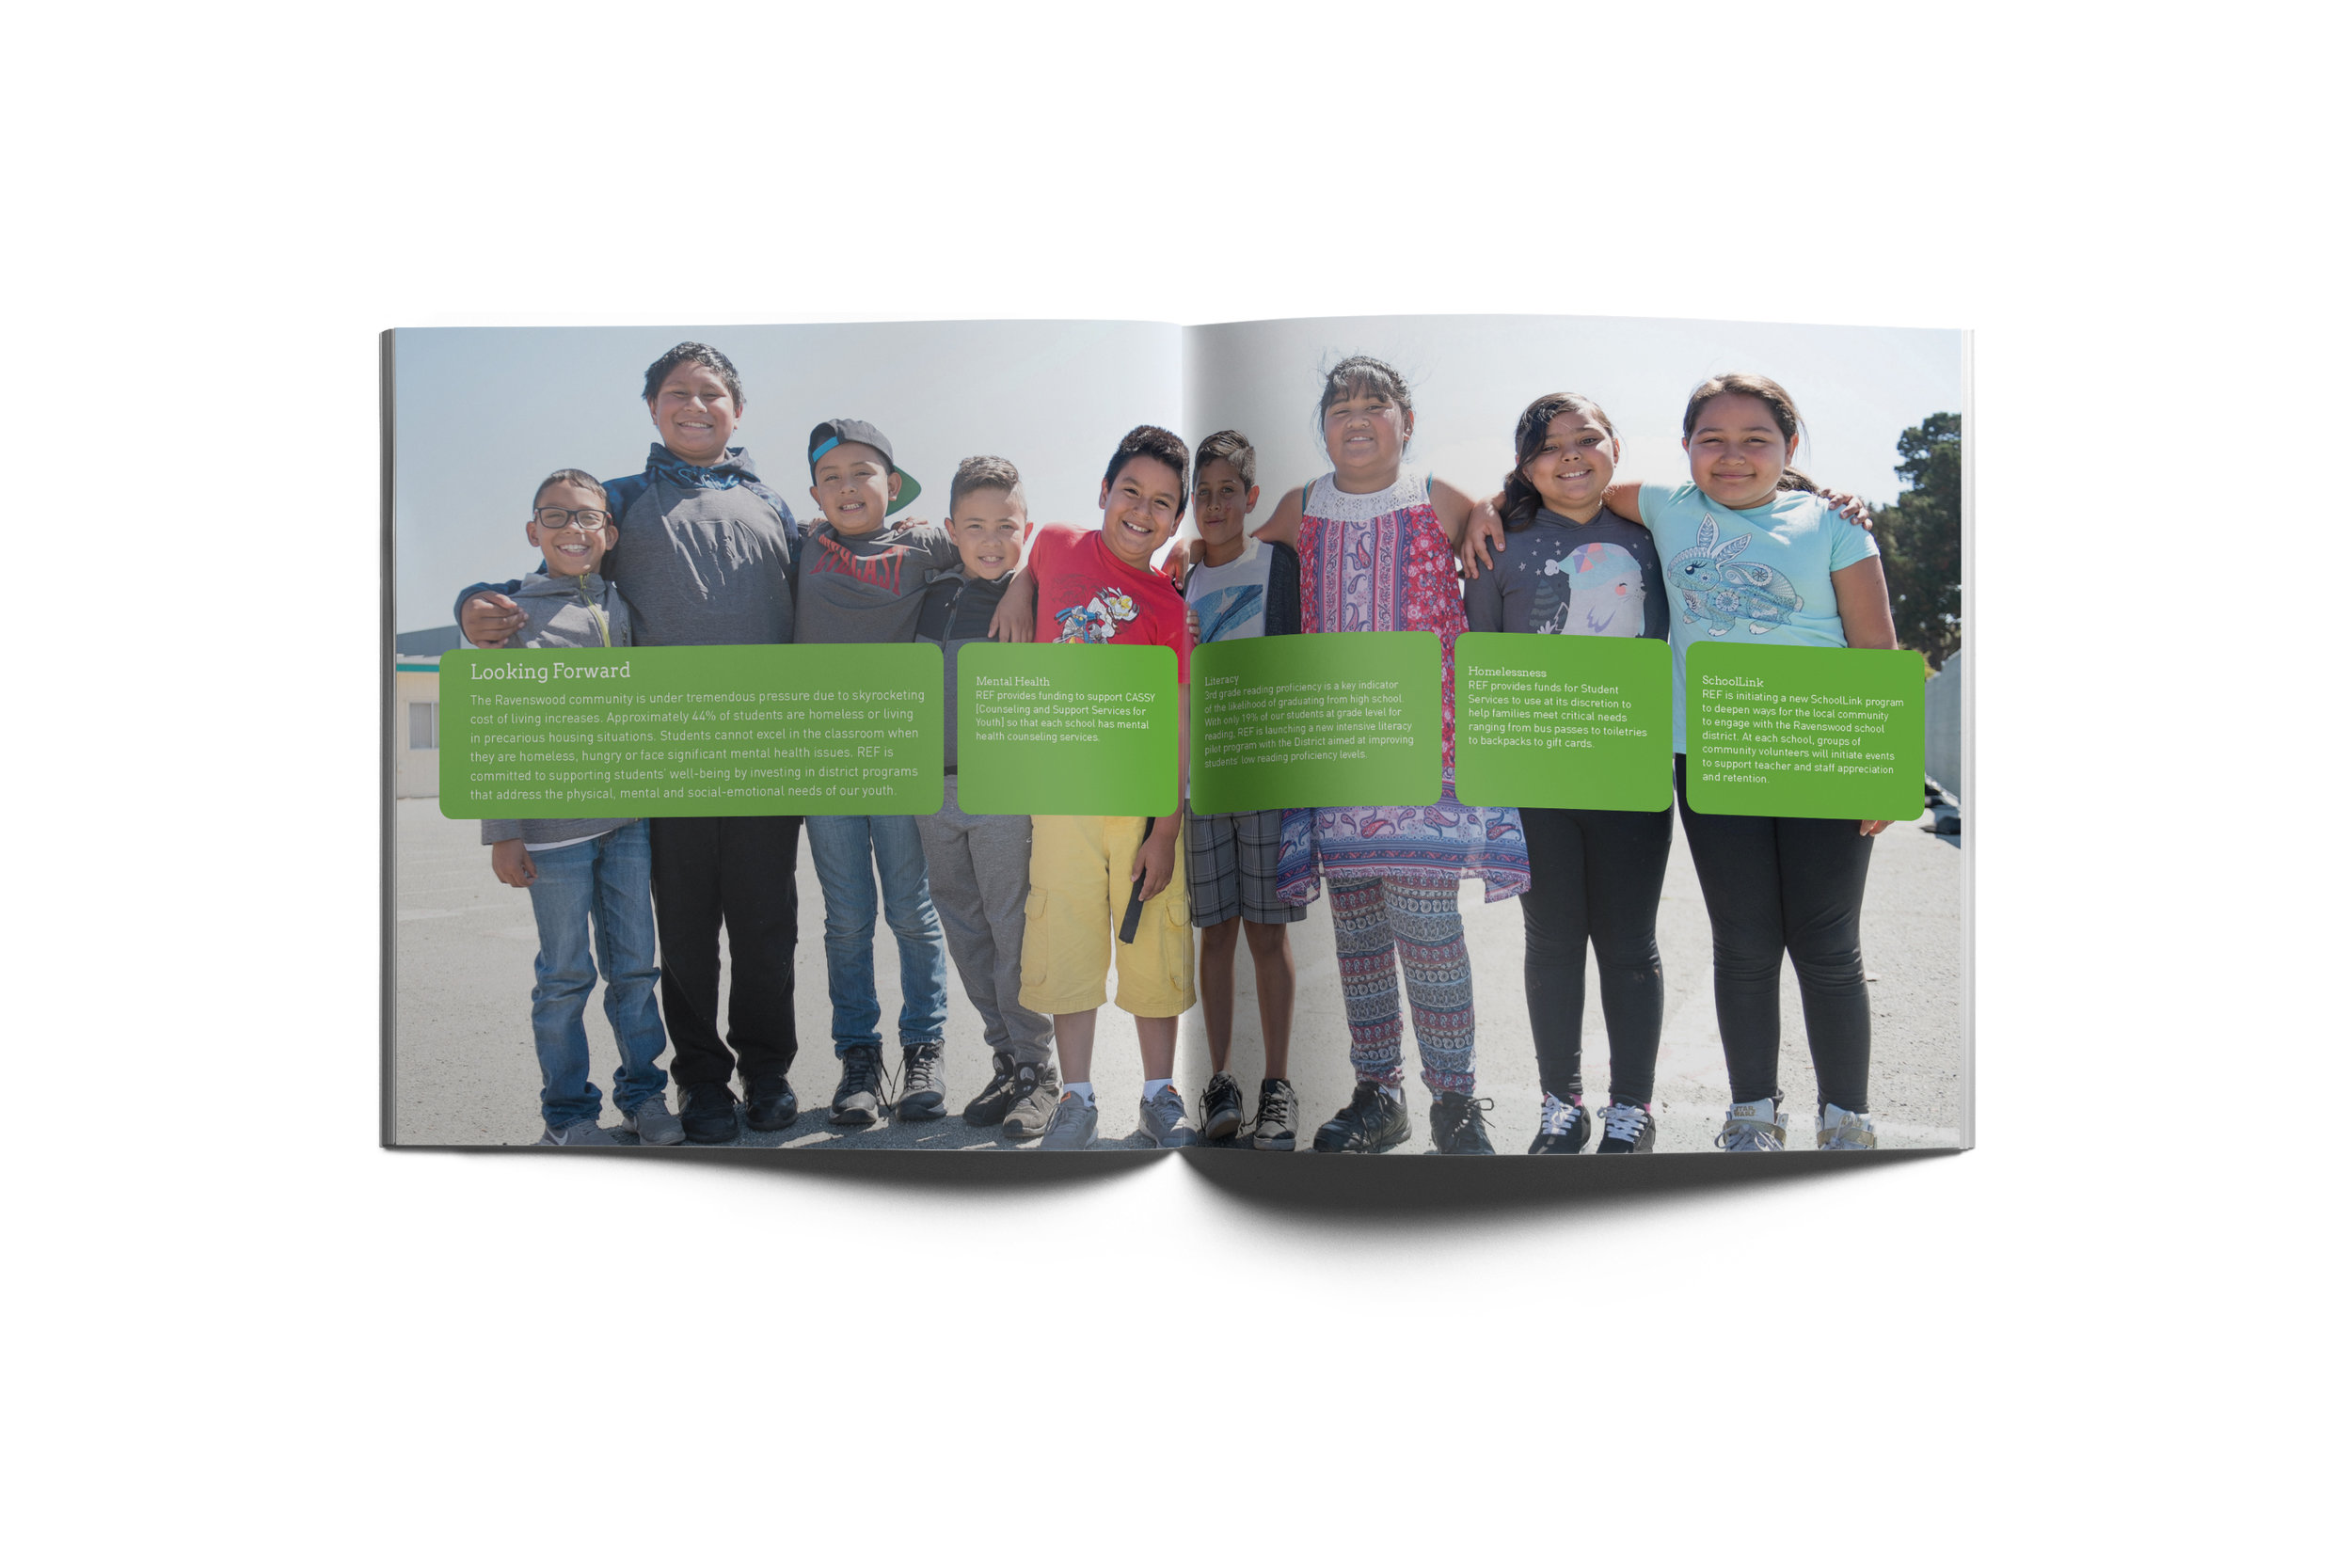 ravenswood education foundation_0005s_0001_annual report 10-11.jpg